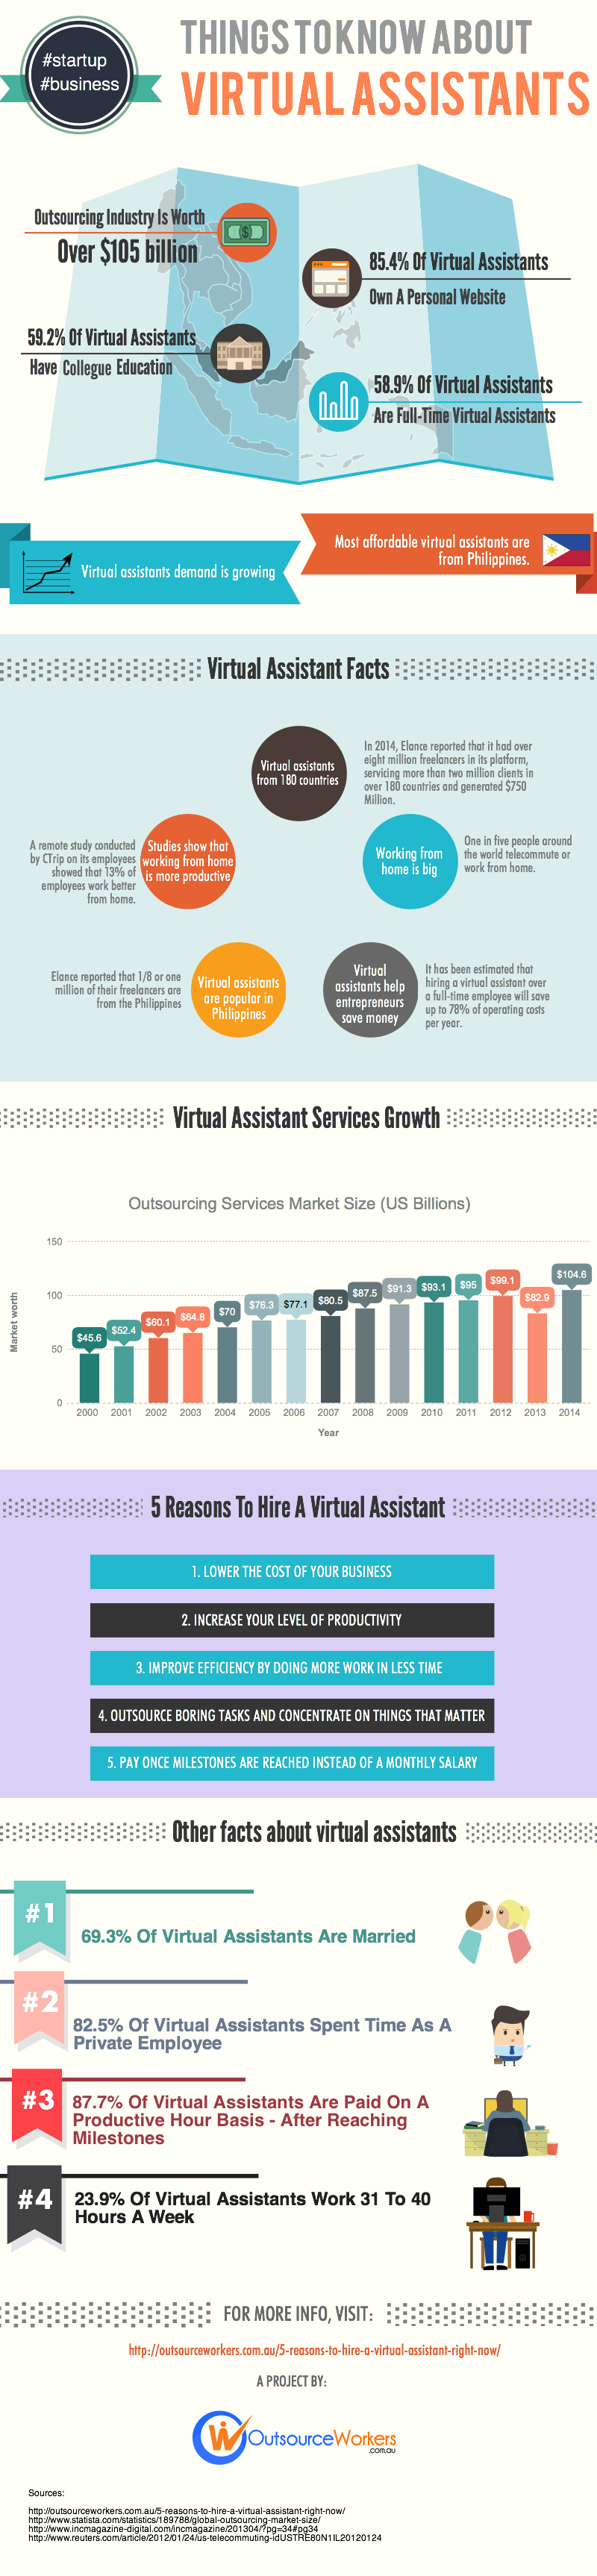 virtual-assistants-infographic-by-OutsourceWorkers